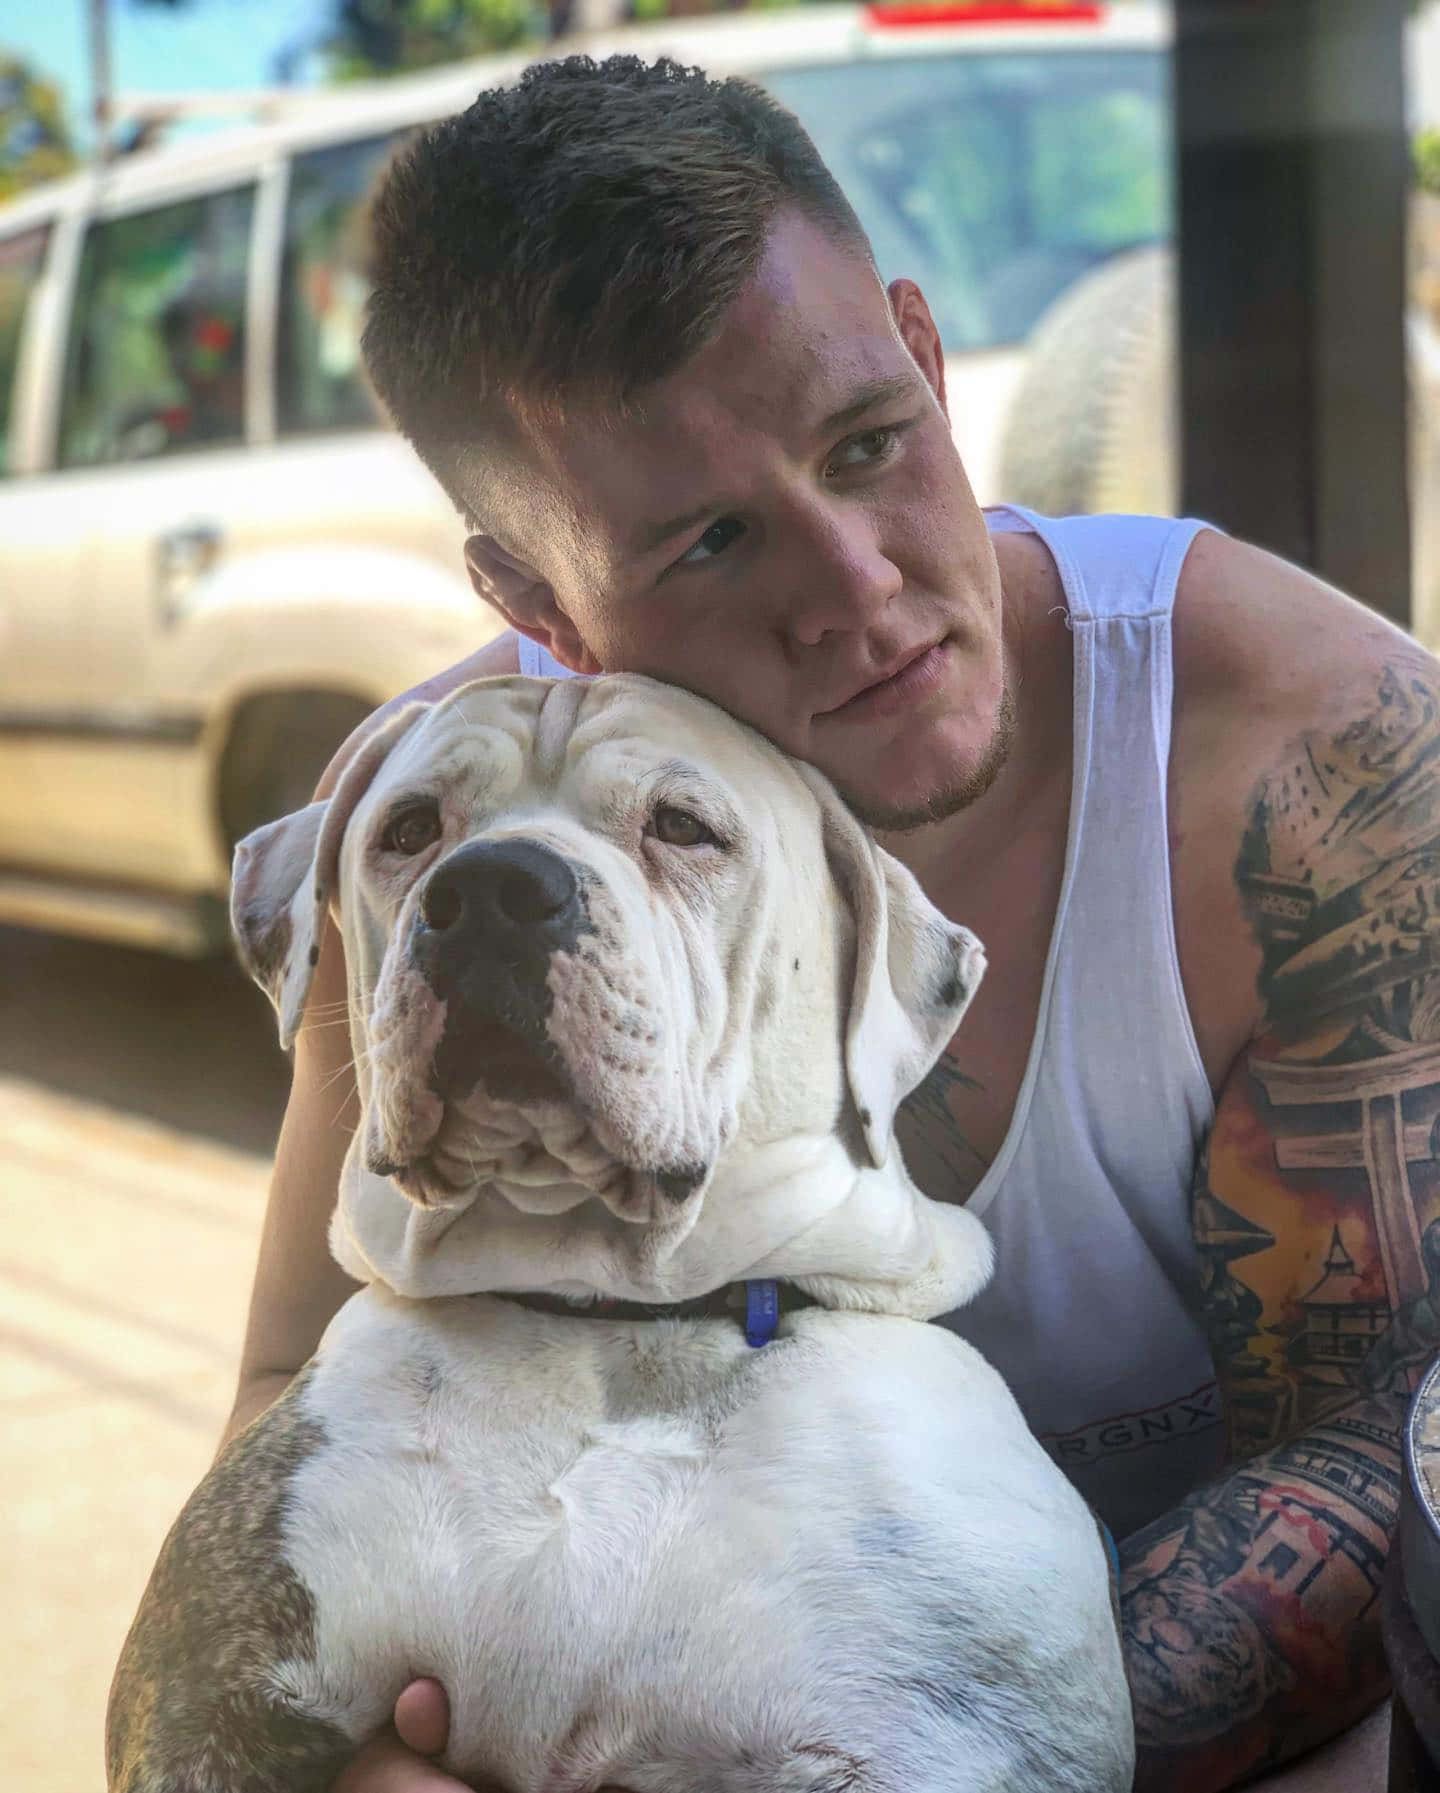 Ufc Fighter Jimmy Crute Hugging His Dog Wallpaper